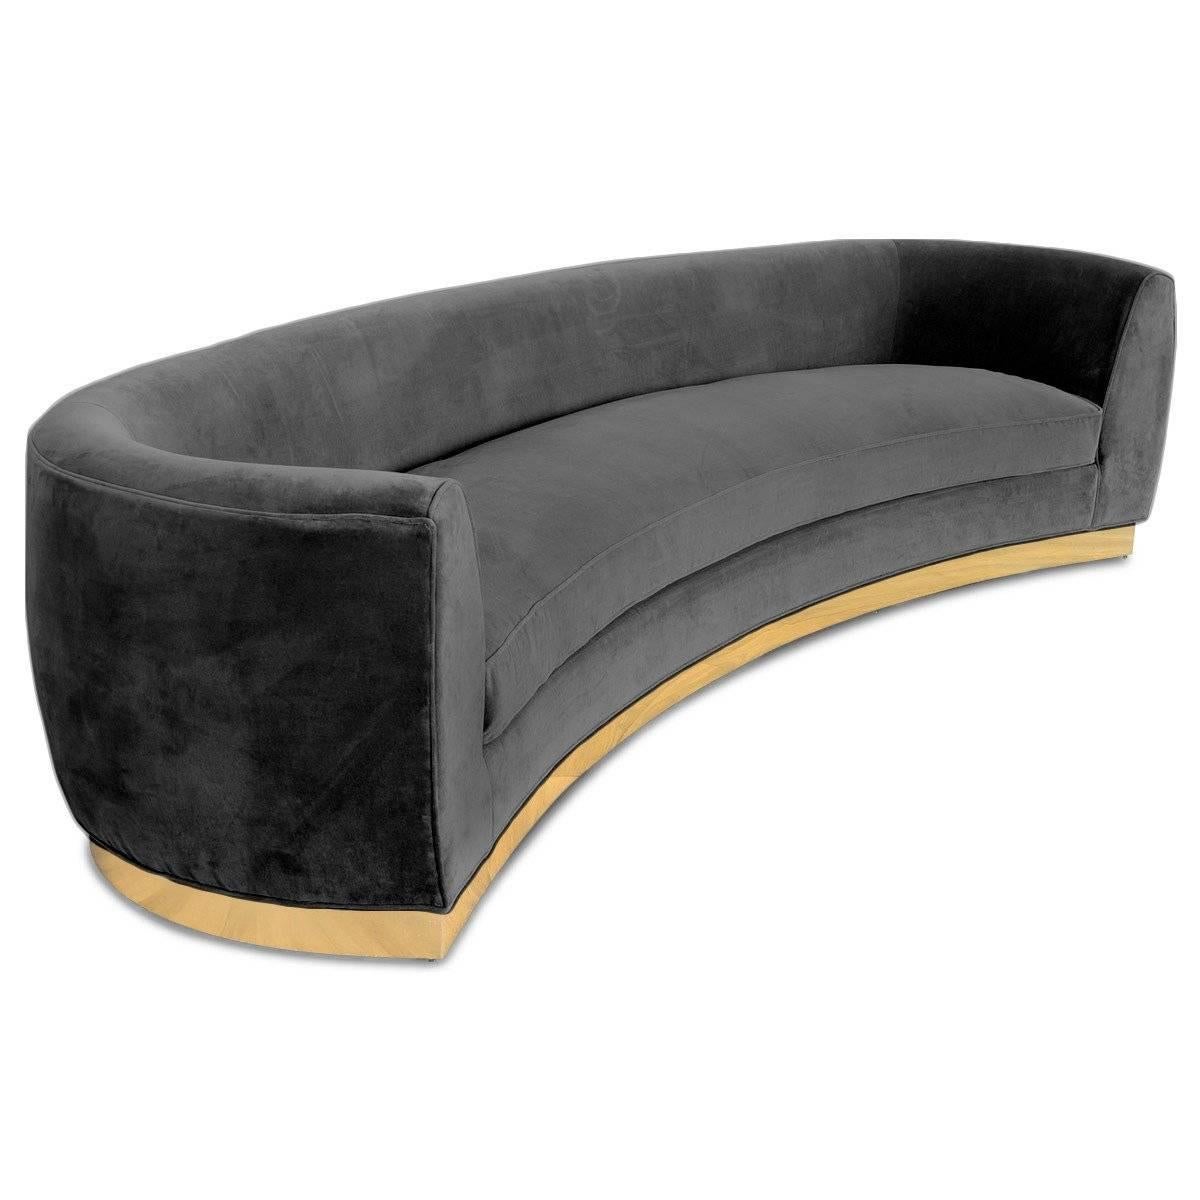 Art Deco Style St. Germain Curved Sofa in Velvet with Brass Toe-kick Base - 9 ft For Sale 8